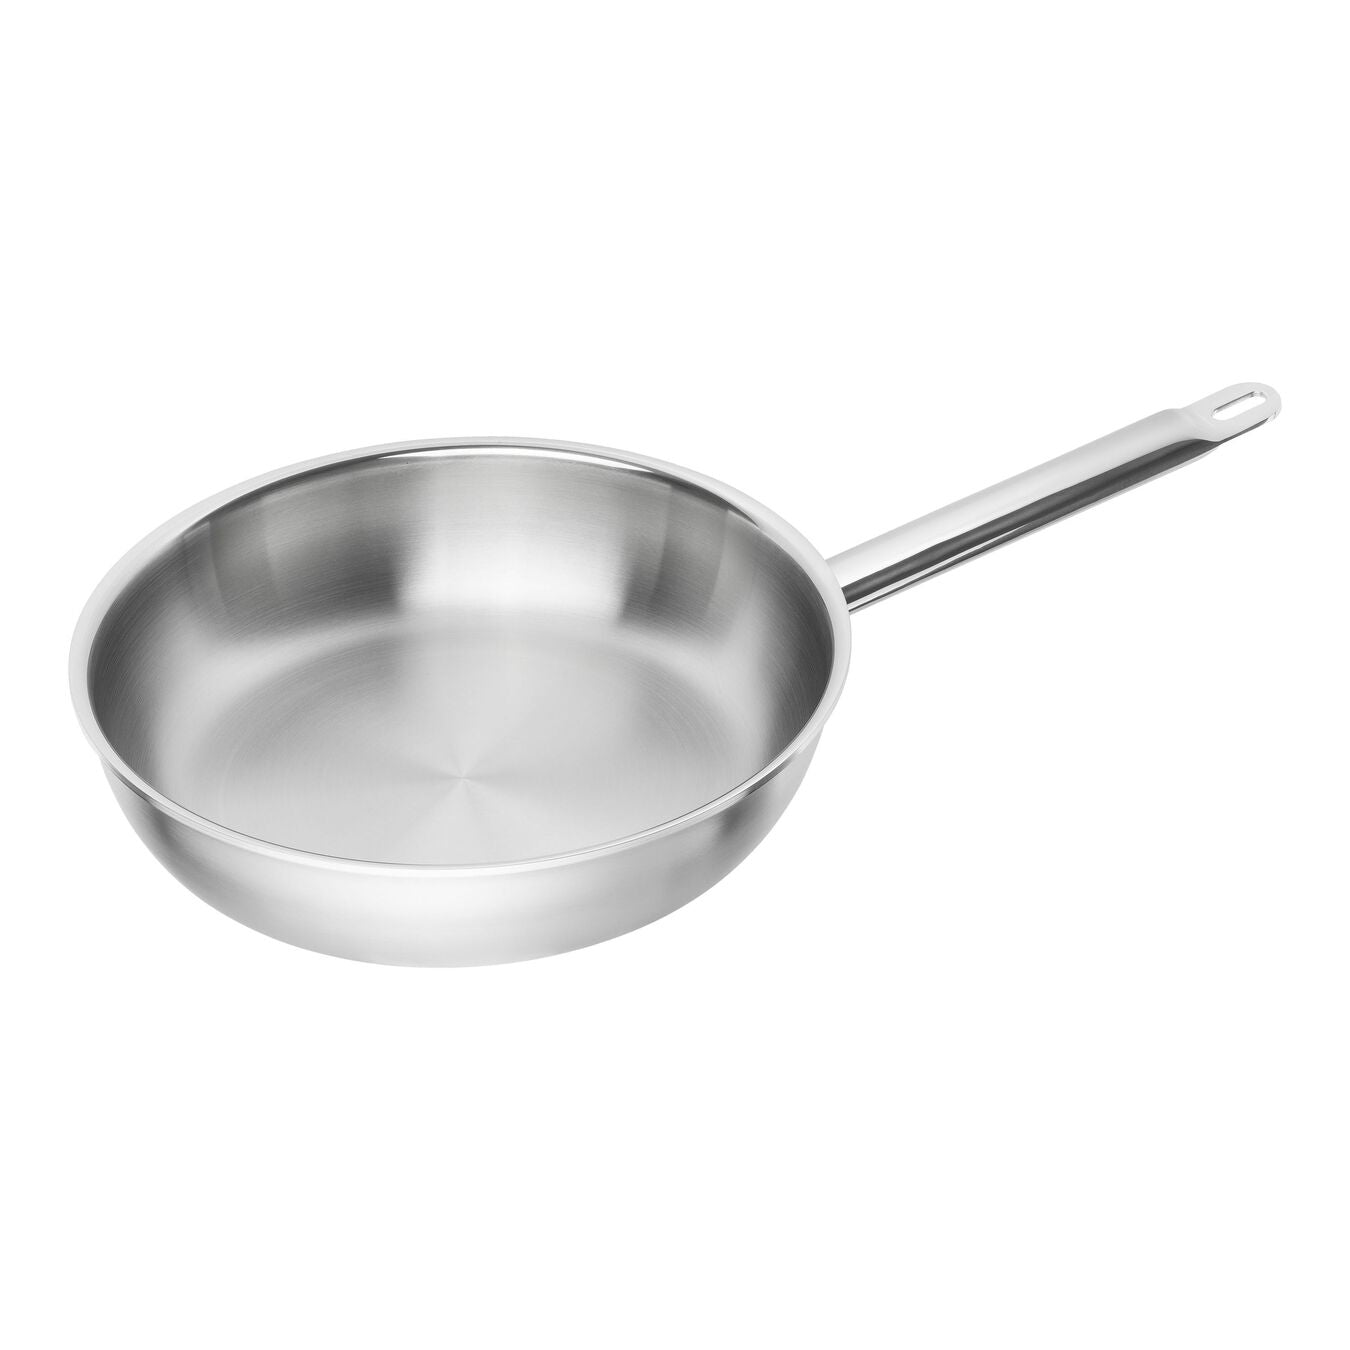 ZWILLING - Pro Stainless Steel Frying Pan - 28cm